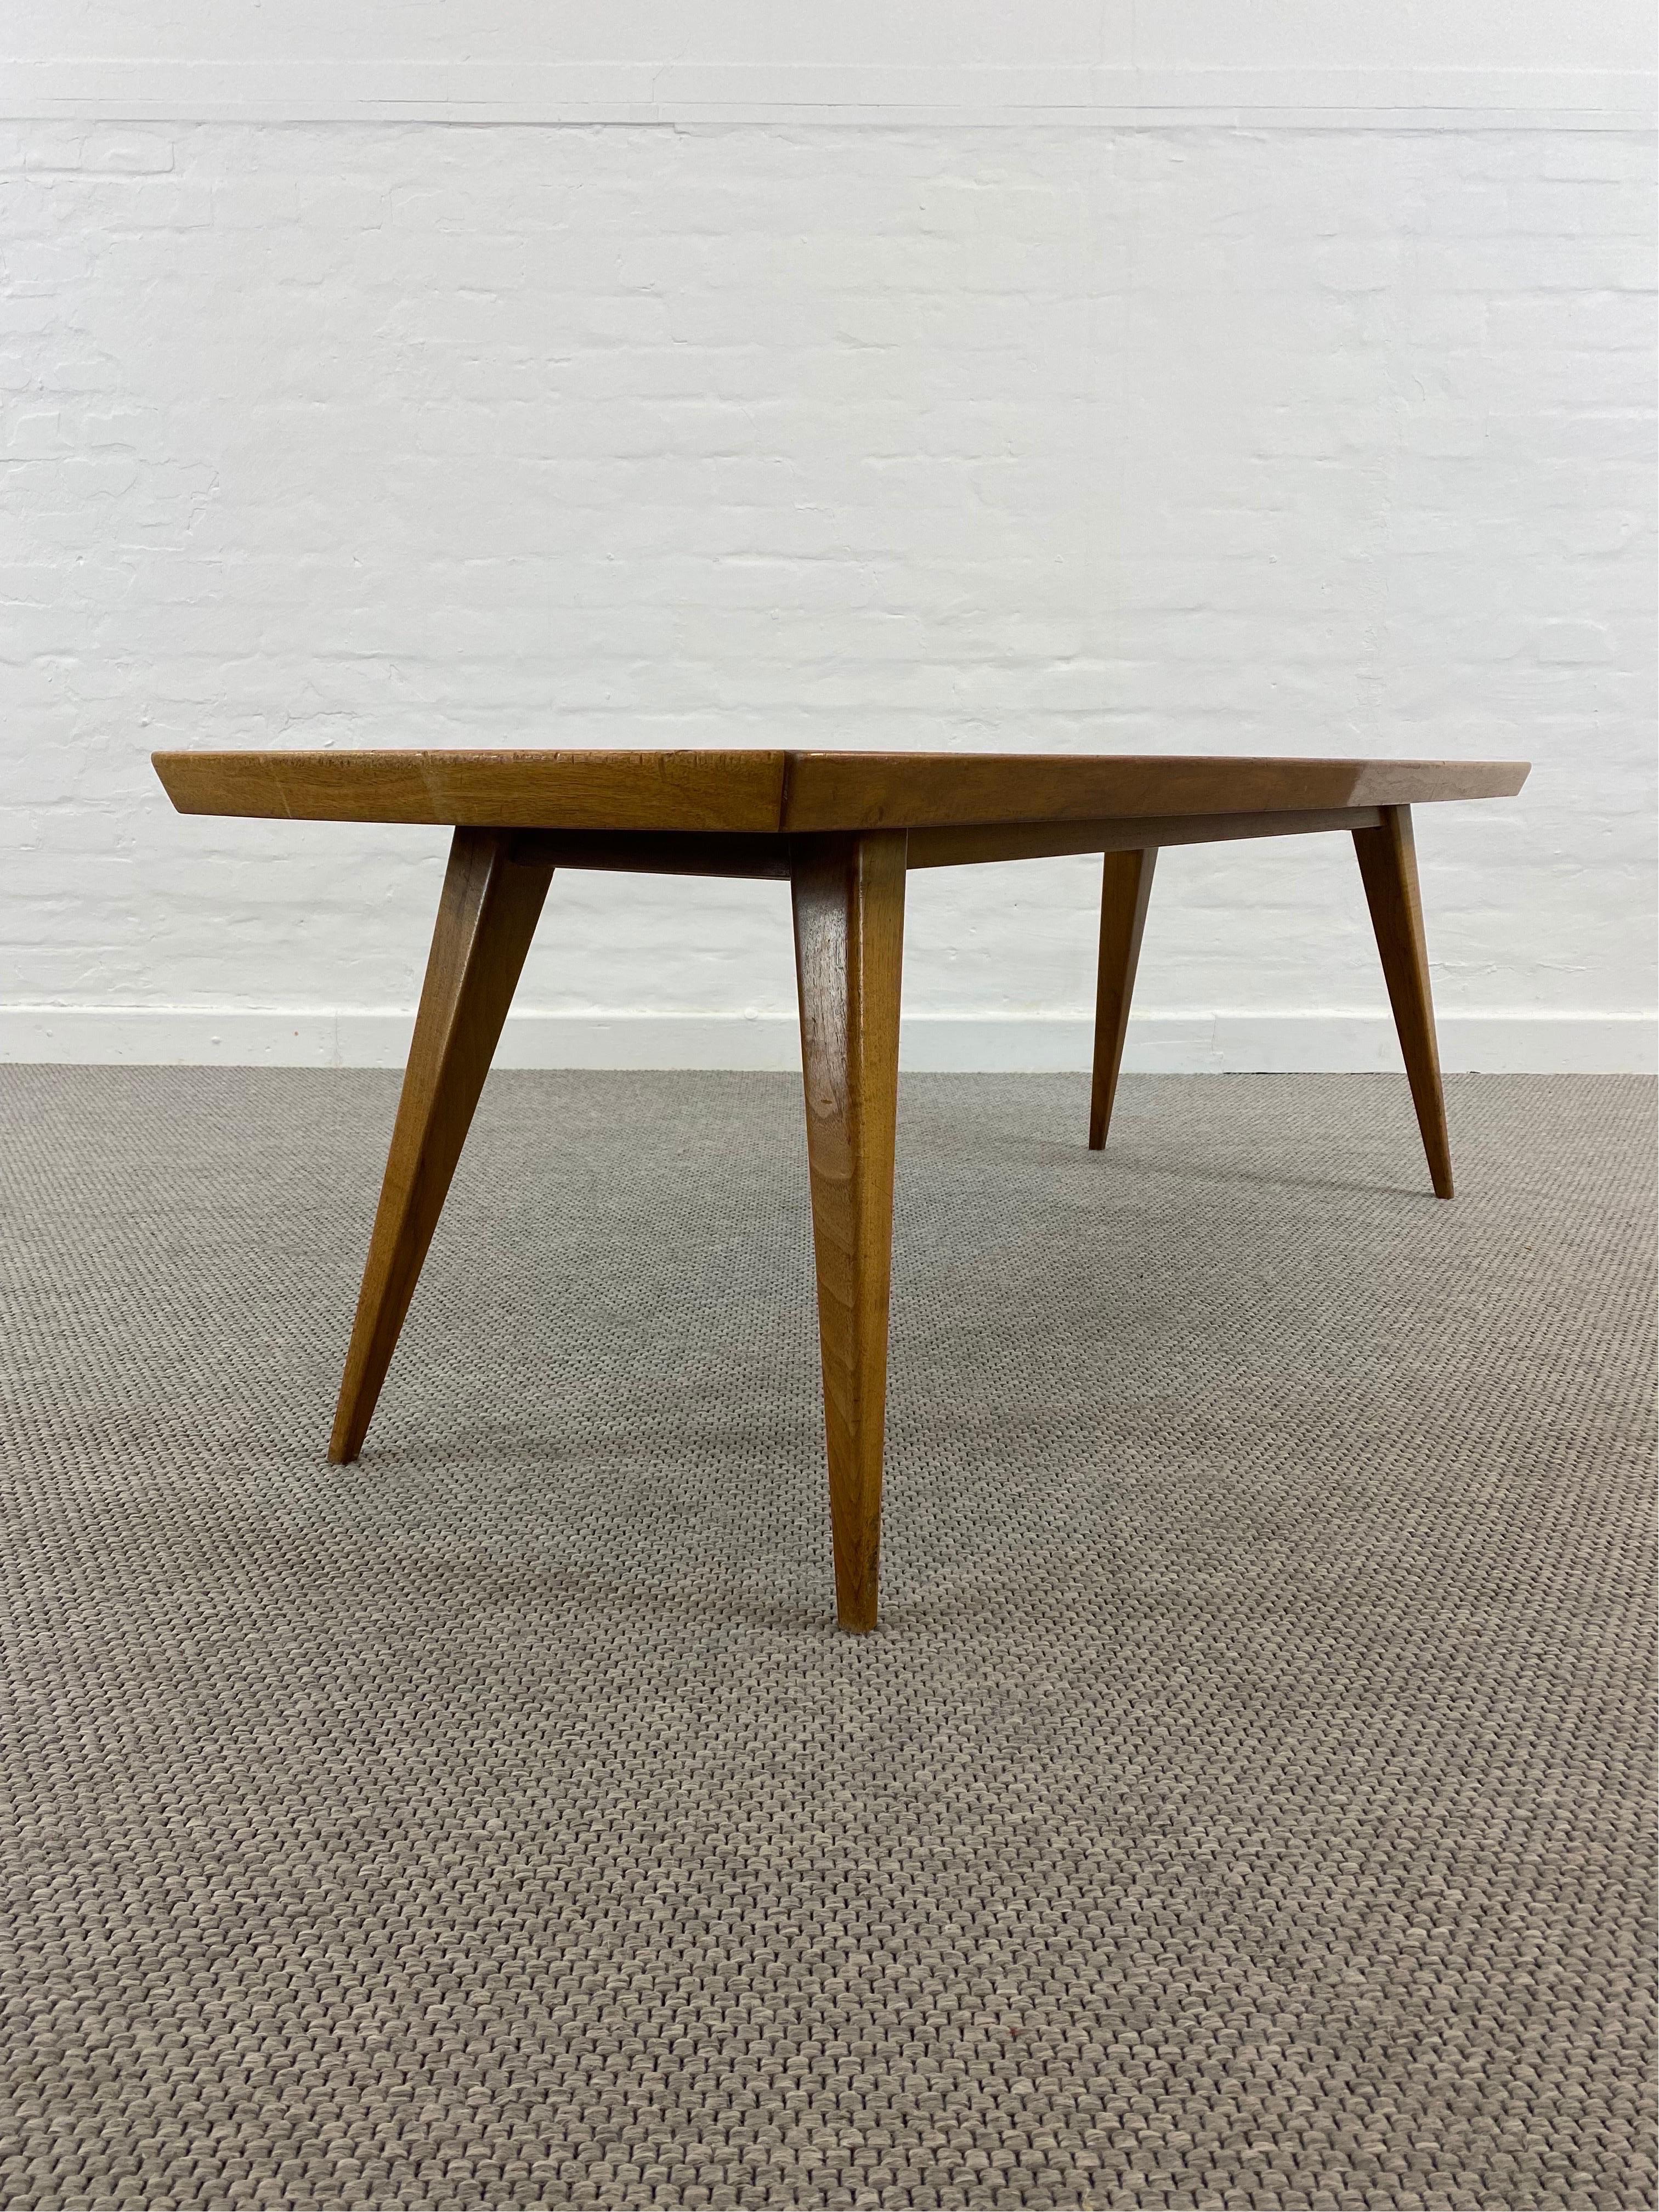 Midcentury 50s Mosaic and Wood Coffee table by Berthold Müller-Oerlinghausen For Sale 2